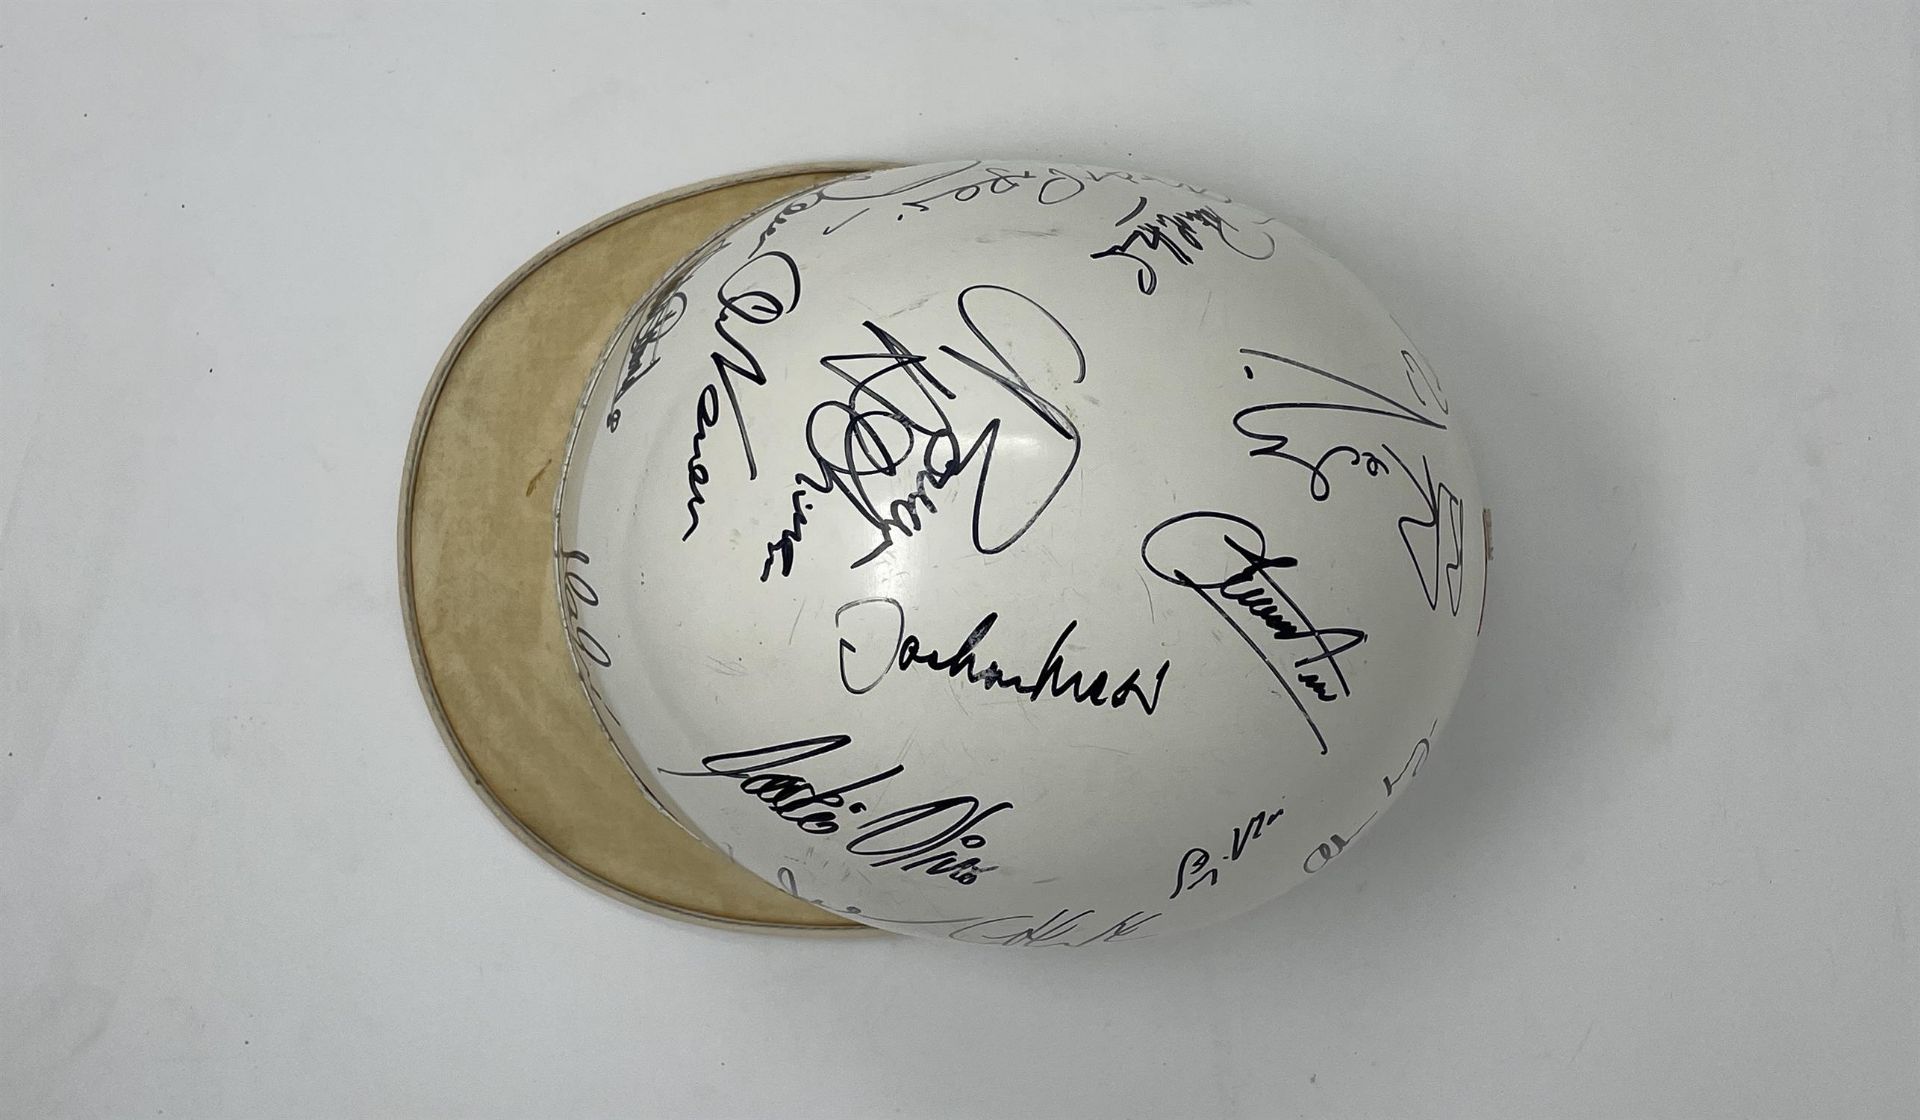 1950s-Style Race Helmet with Multiple Signatures Including Sir Jackie Stewart and Sir Stirling Moss - Image 4 of 5